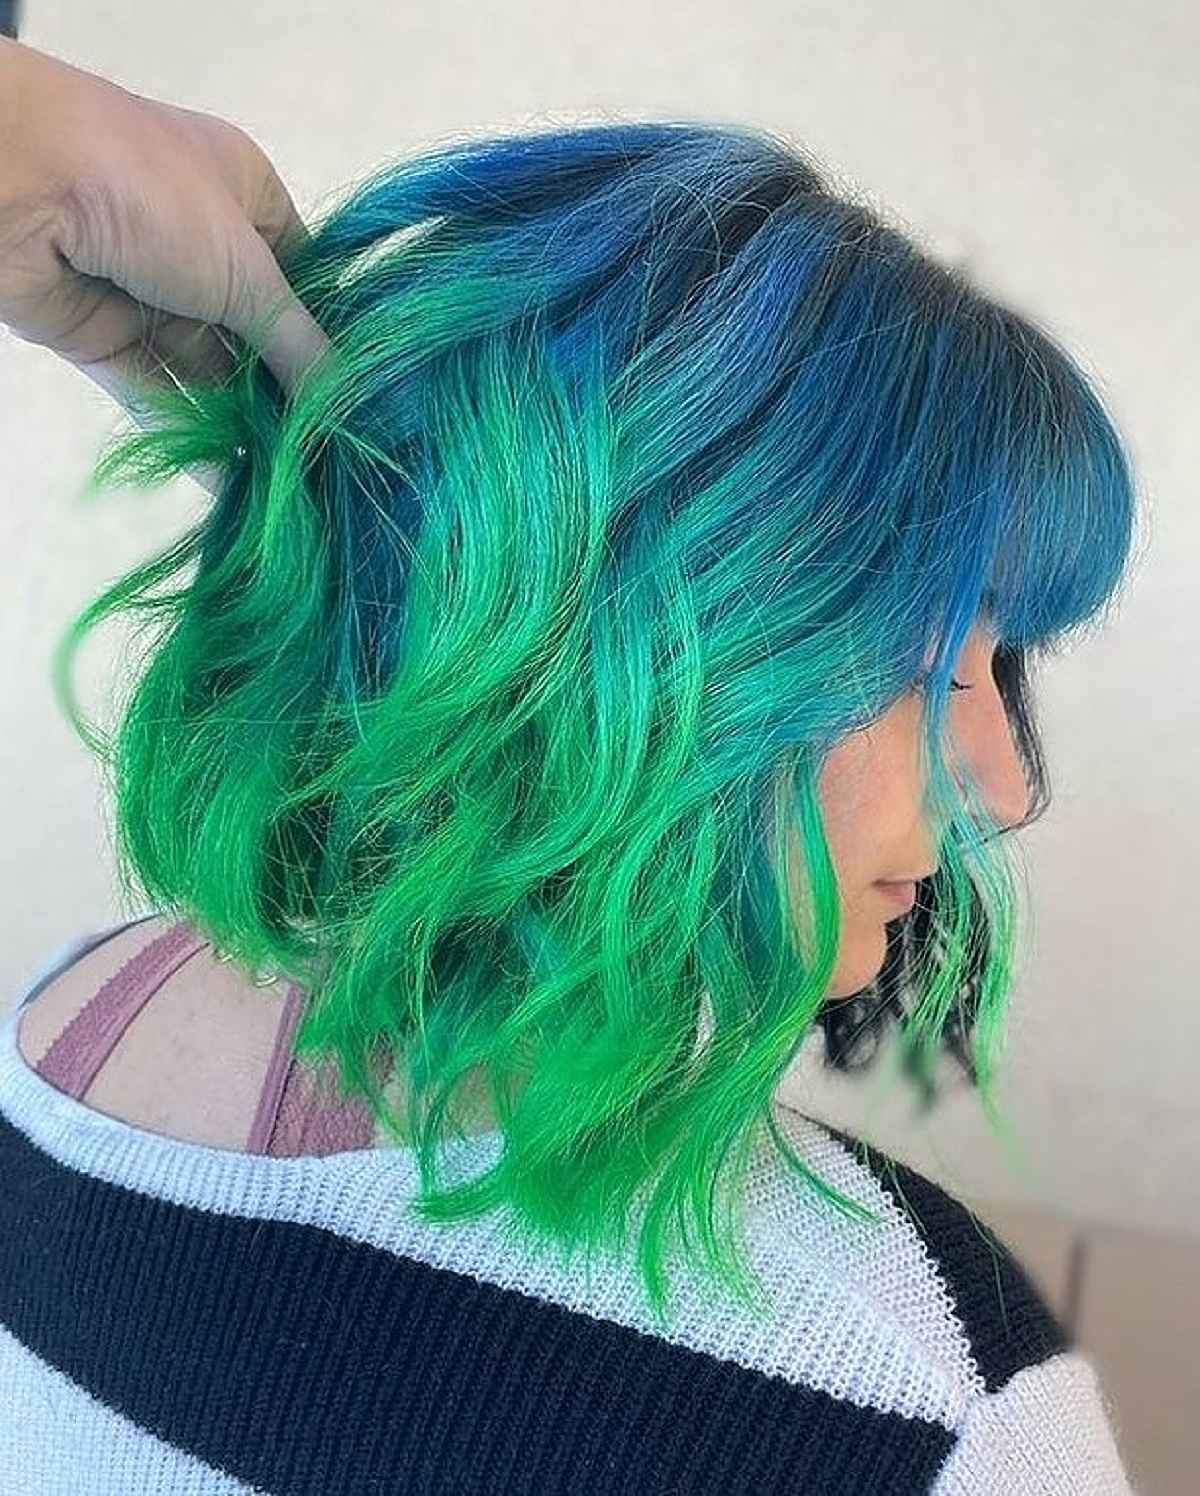 Hair color that is a combination of blue and green